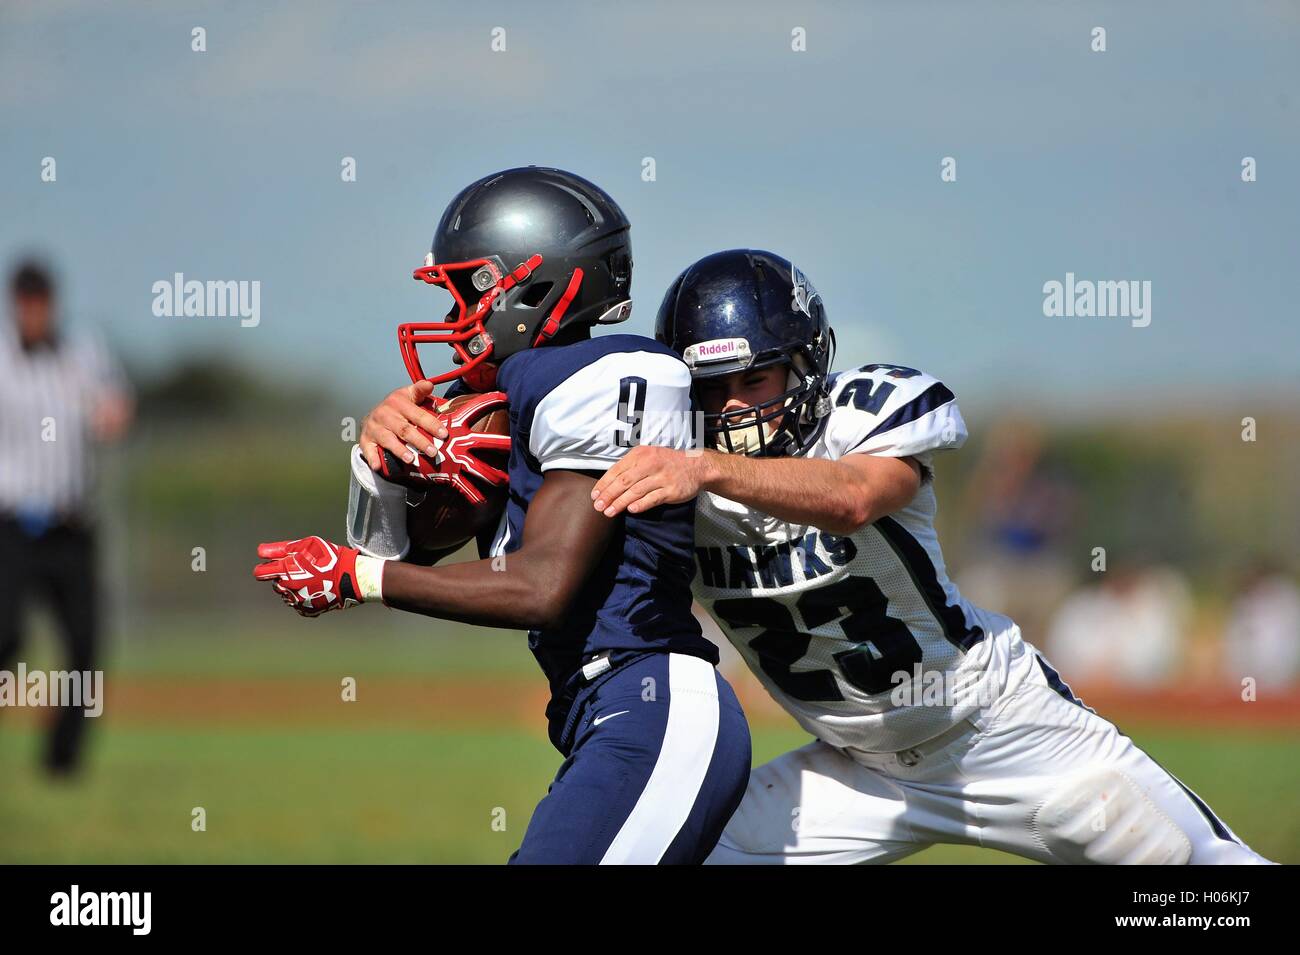 Defensive back wrapping up an opposing running back in making a solo tackle during a high school football game. USA. Stock Photo